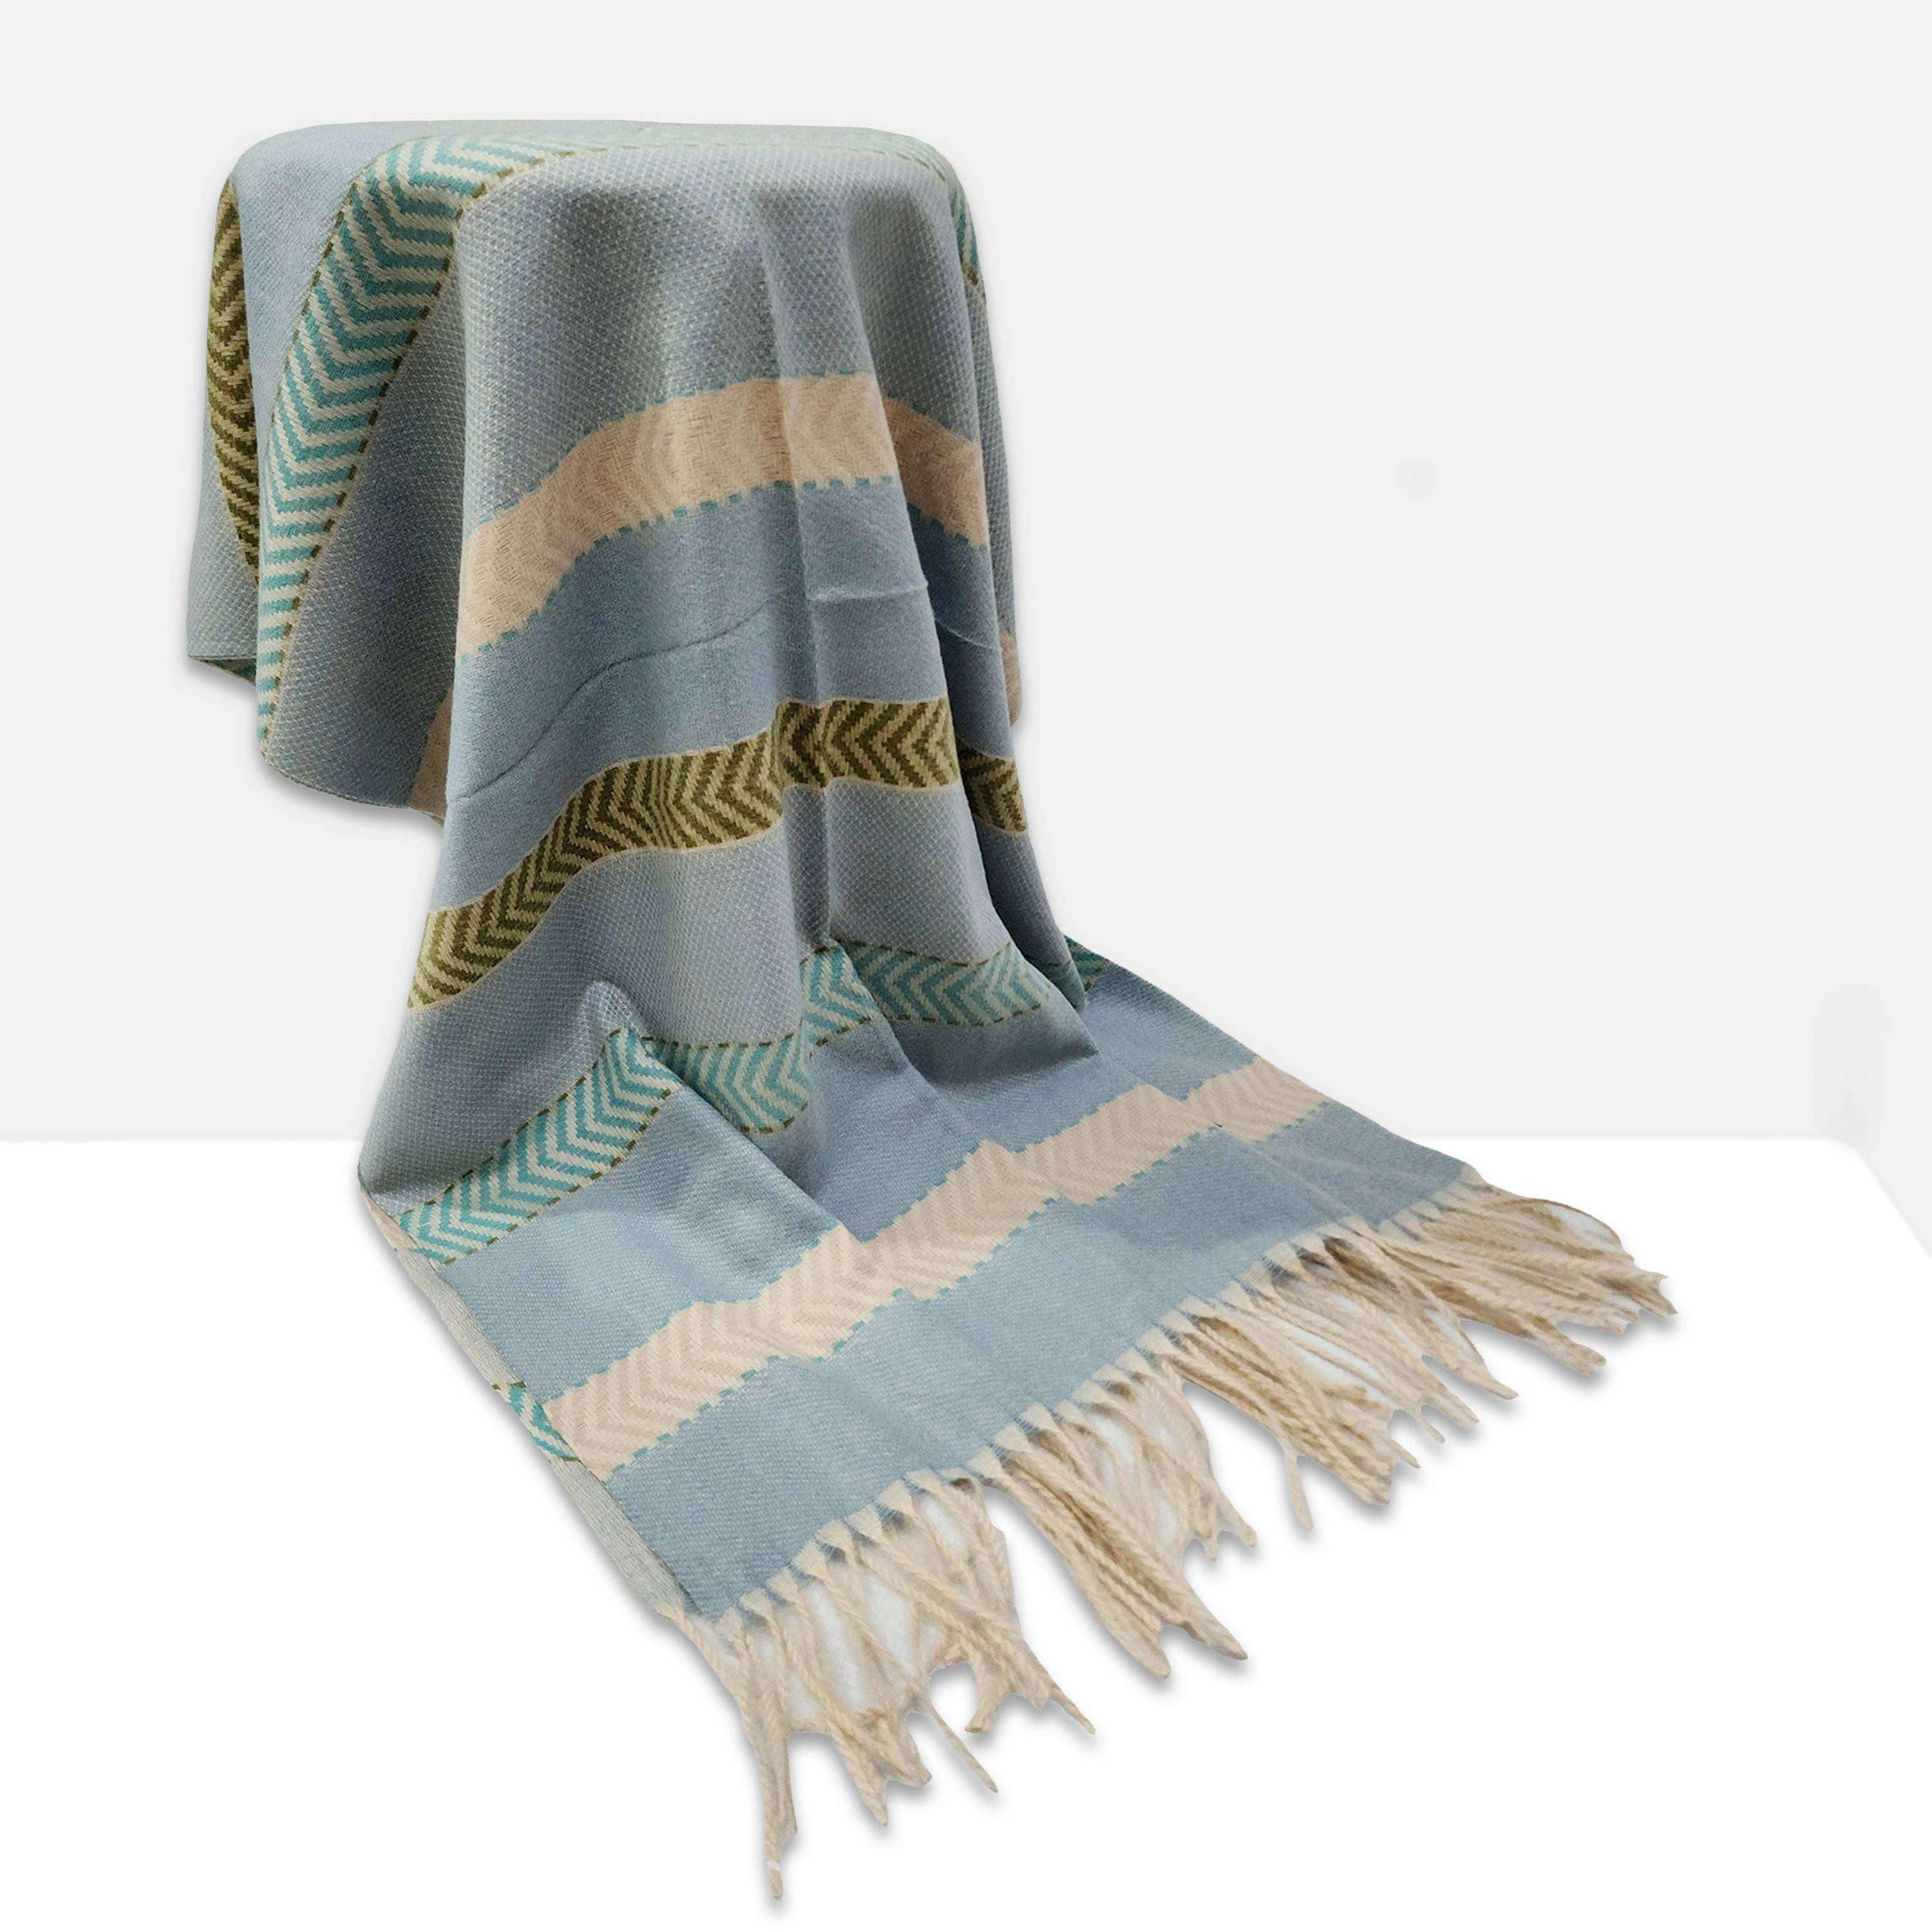 Strip Shawl, Cozy Comfort, In Earth Color Stripes